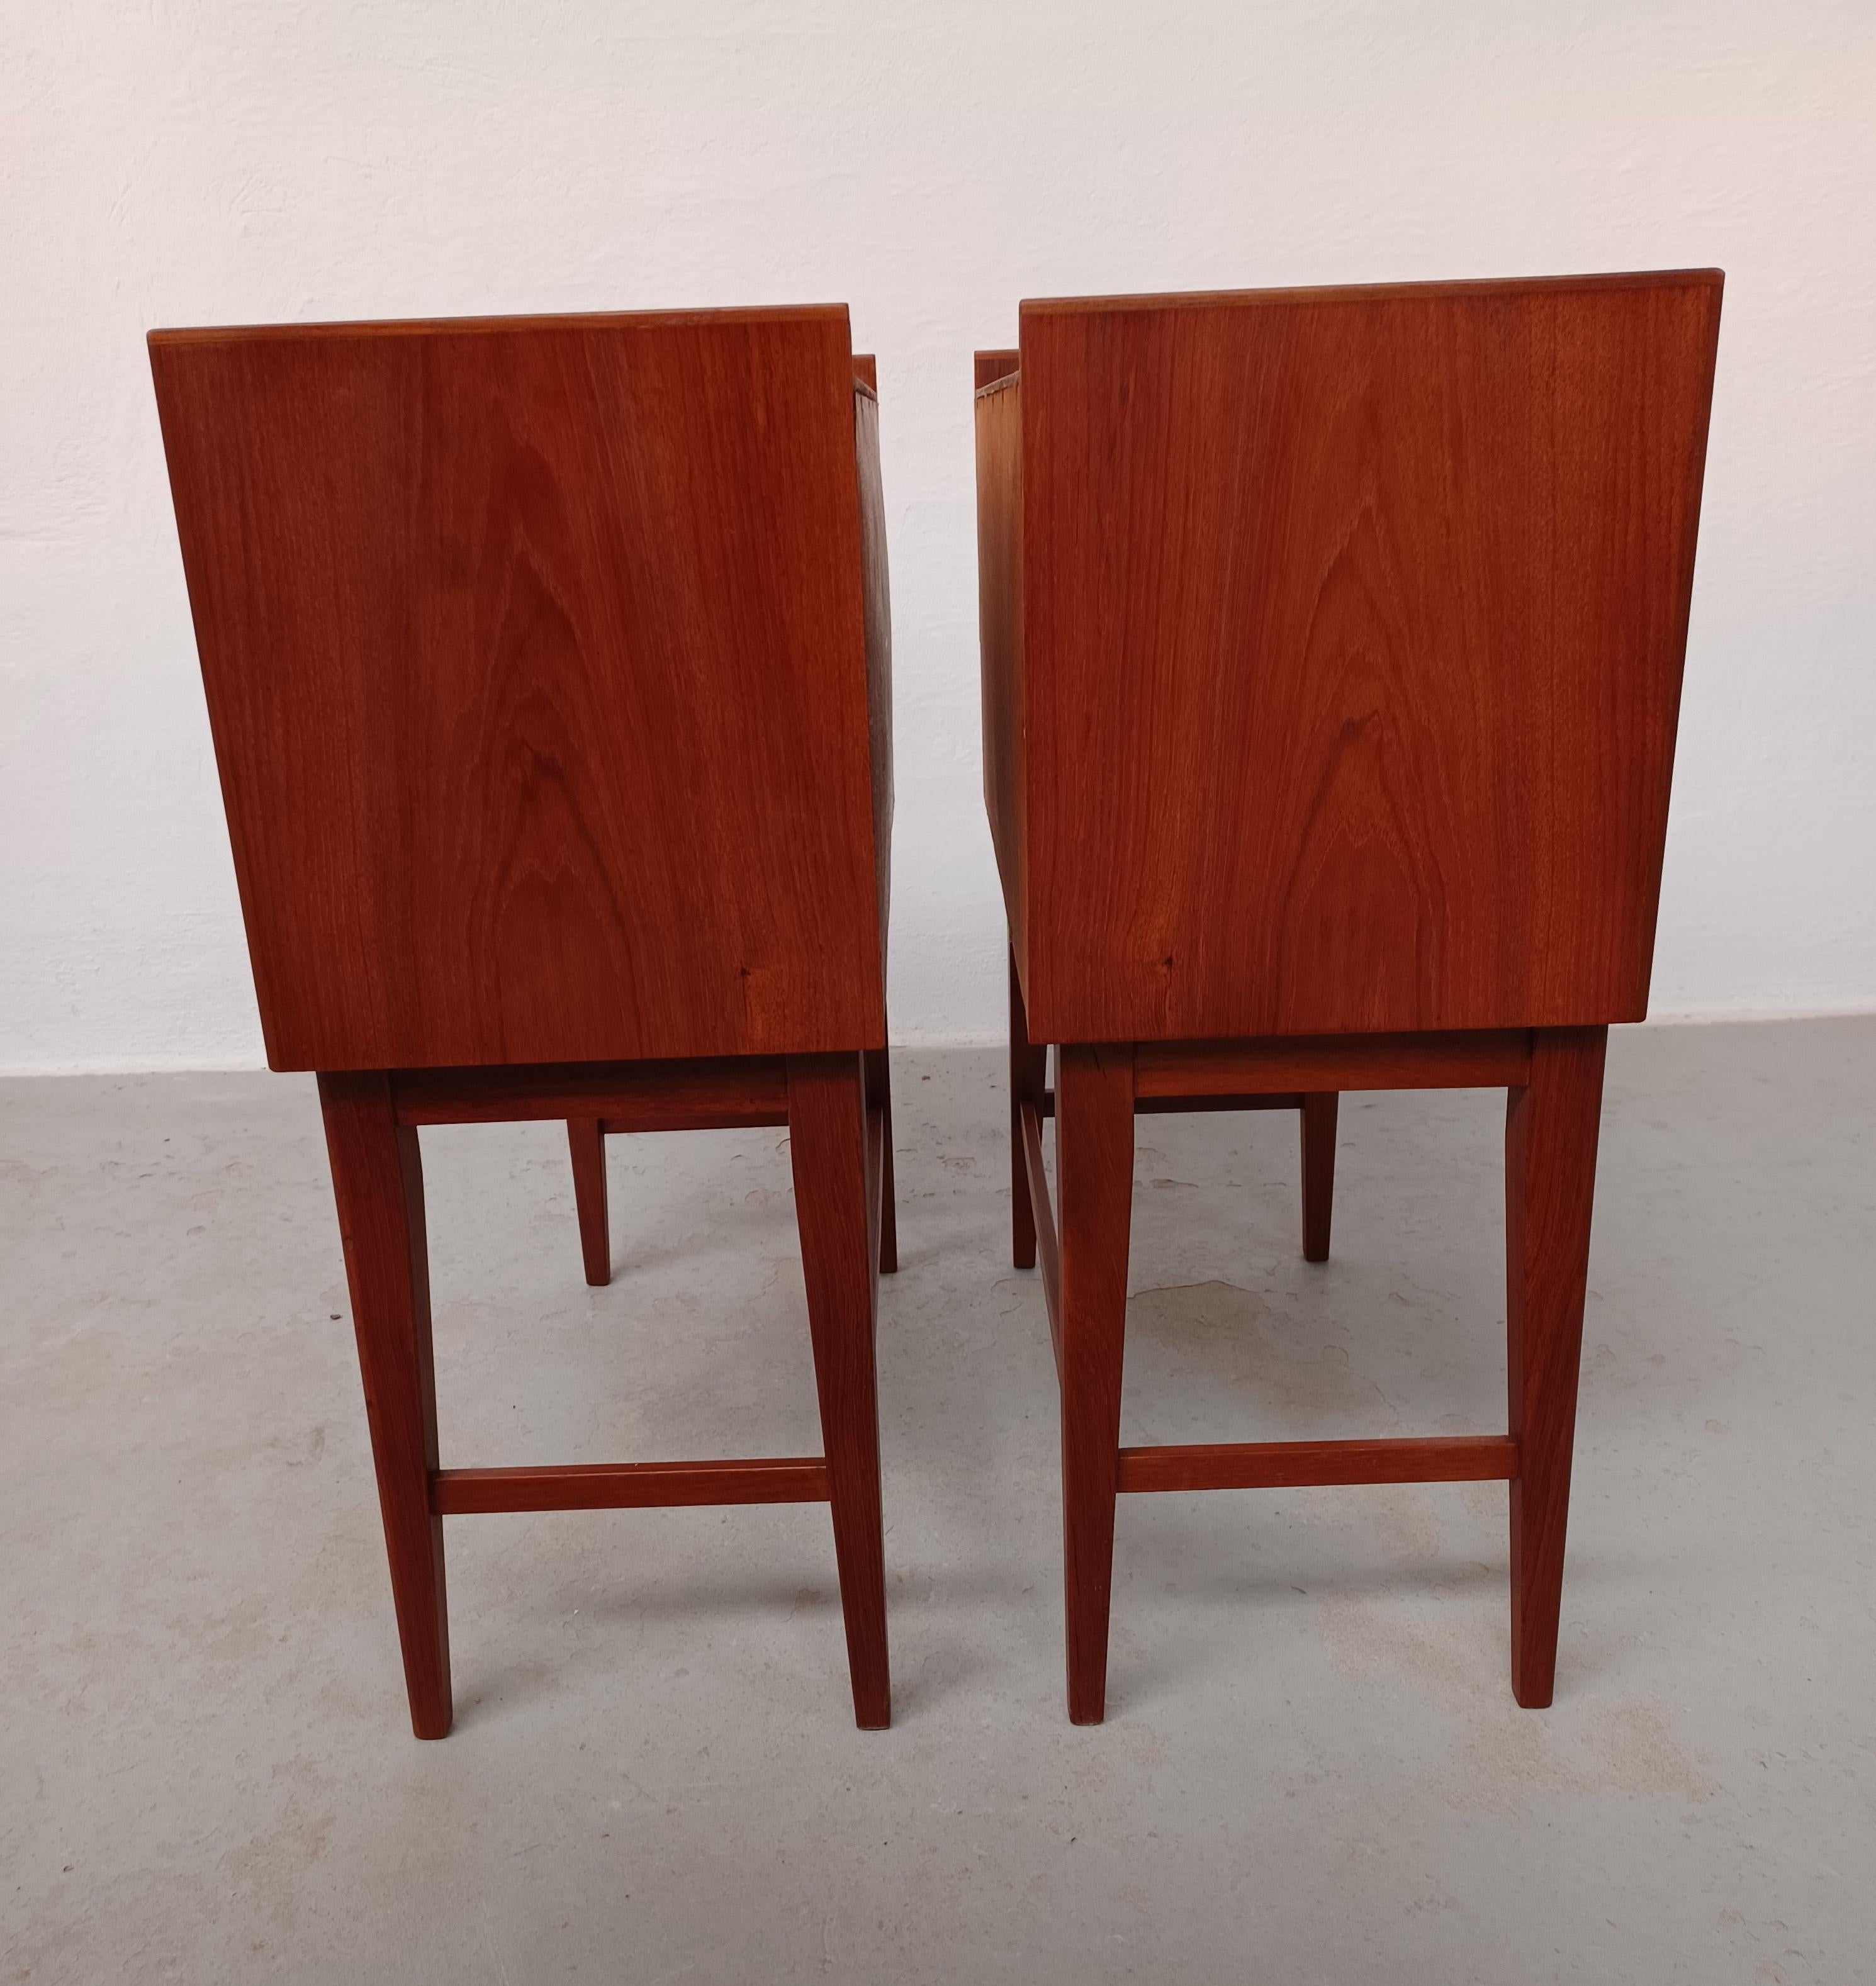 1960s Set of Two Small Fully Restored and Refinished Danish Teak Dressers  For Sale 2